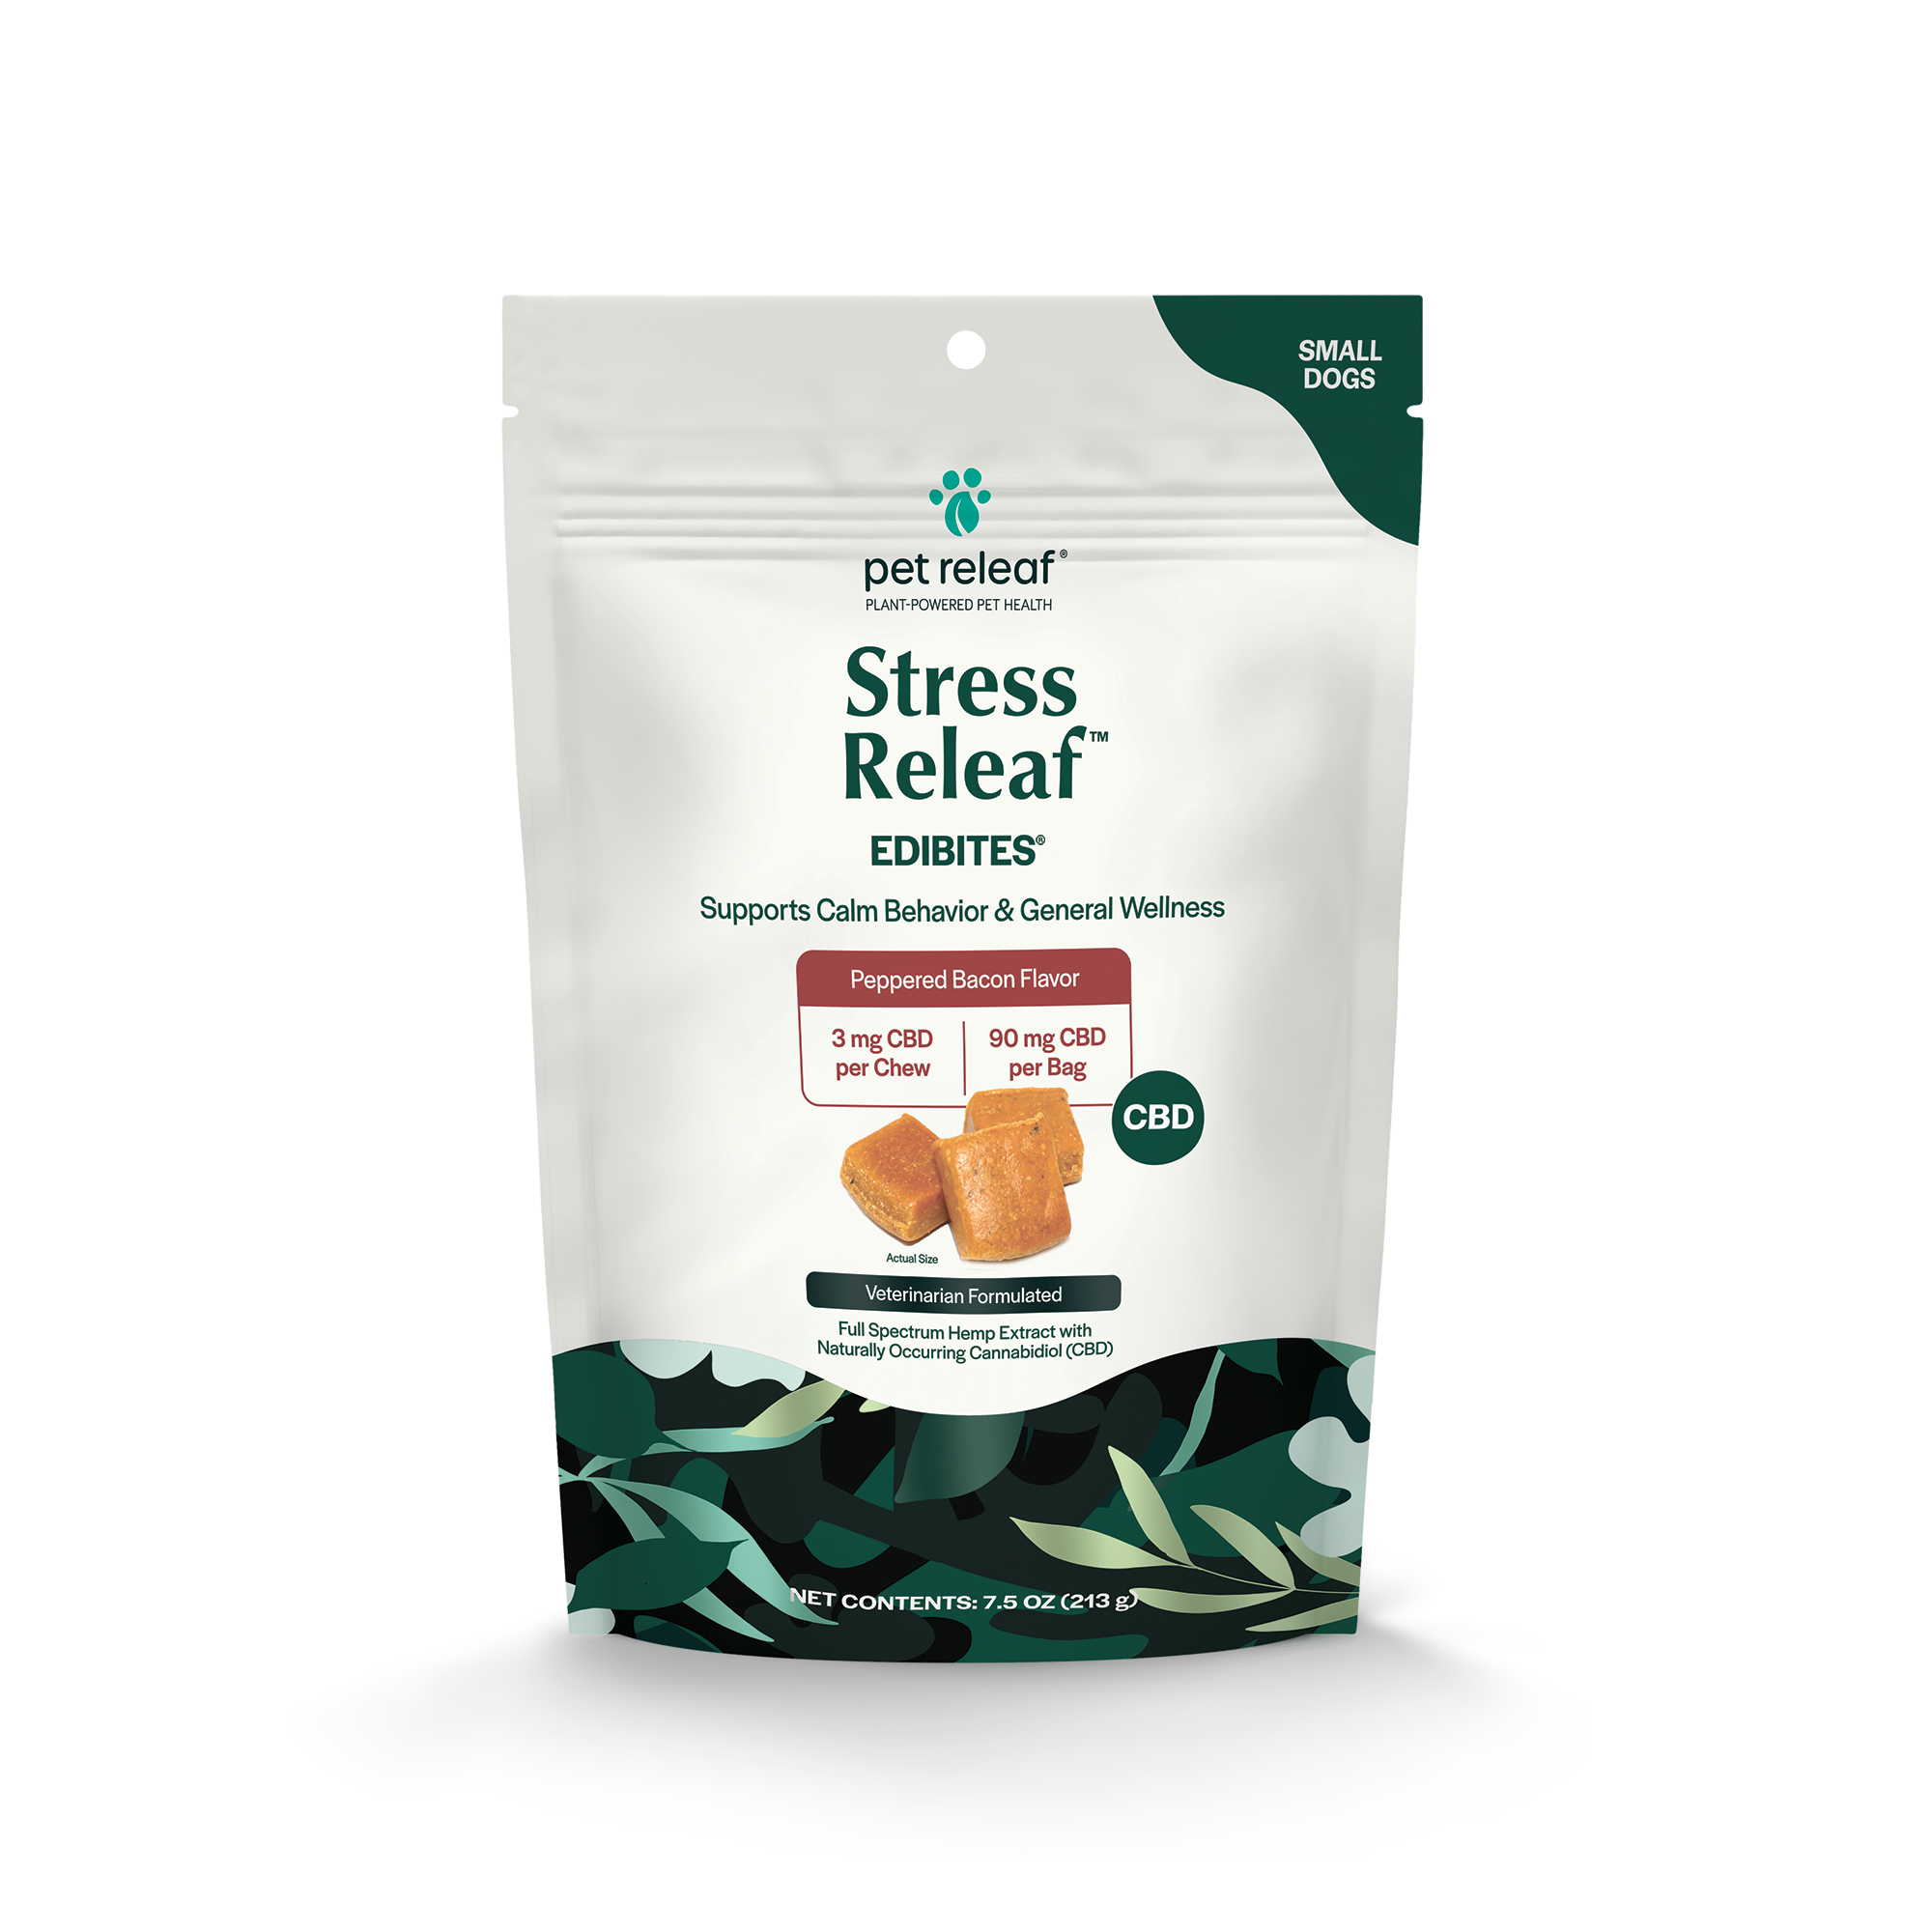 Stress Releaf Edibites for Small Dogs - Peppered Bacon Flavor